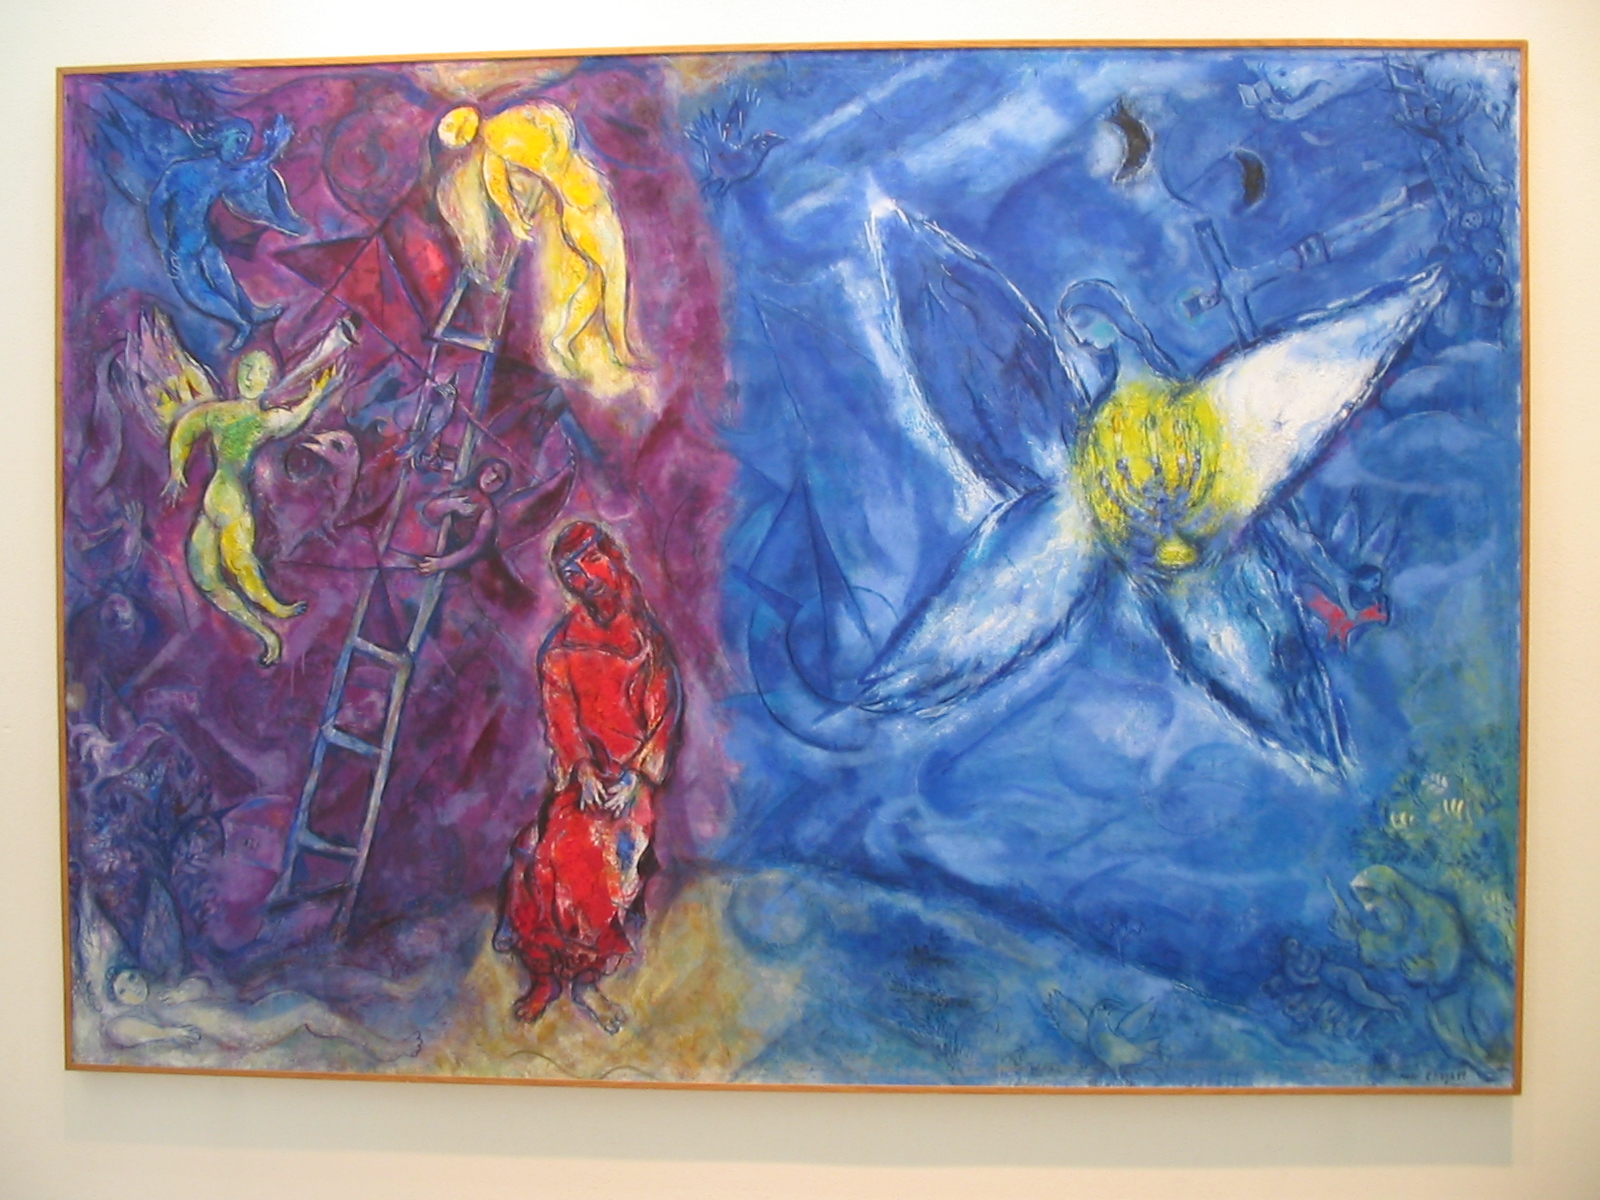 File:IMusée national message biblique Marc Chagall - panoramio.jpg 